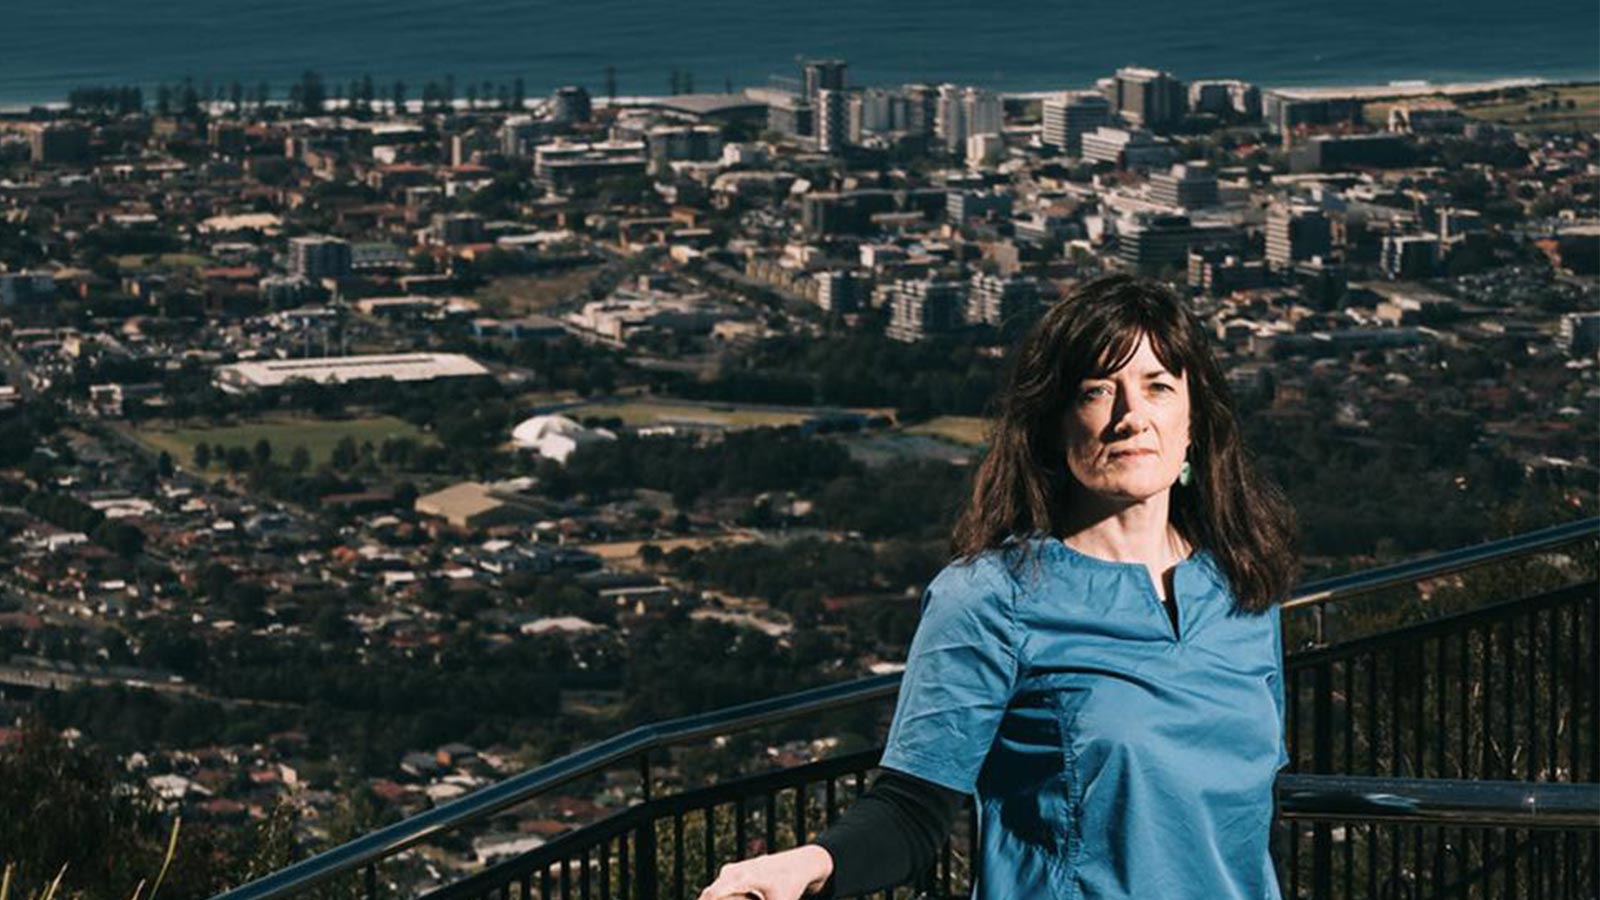 Pauline McGuirk has dark shoulder length hair and a blue T-shirt. She is leaning against a fence at Mount Keira, which overlooks the Wollongong housing and beach skyline.